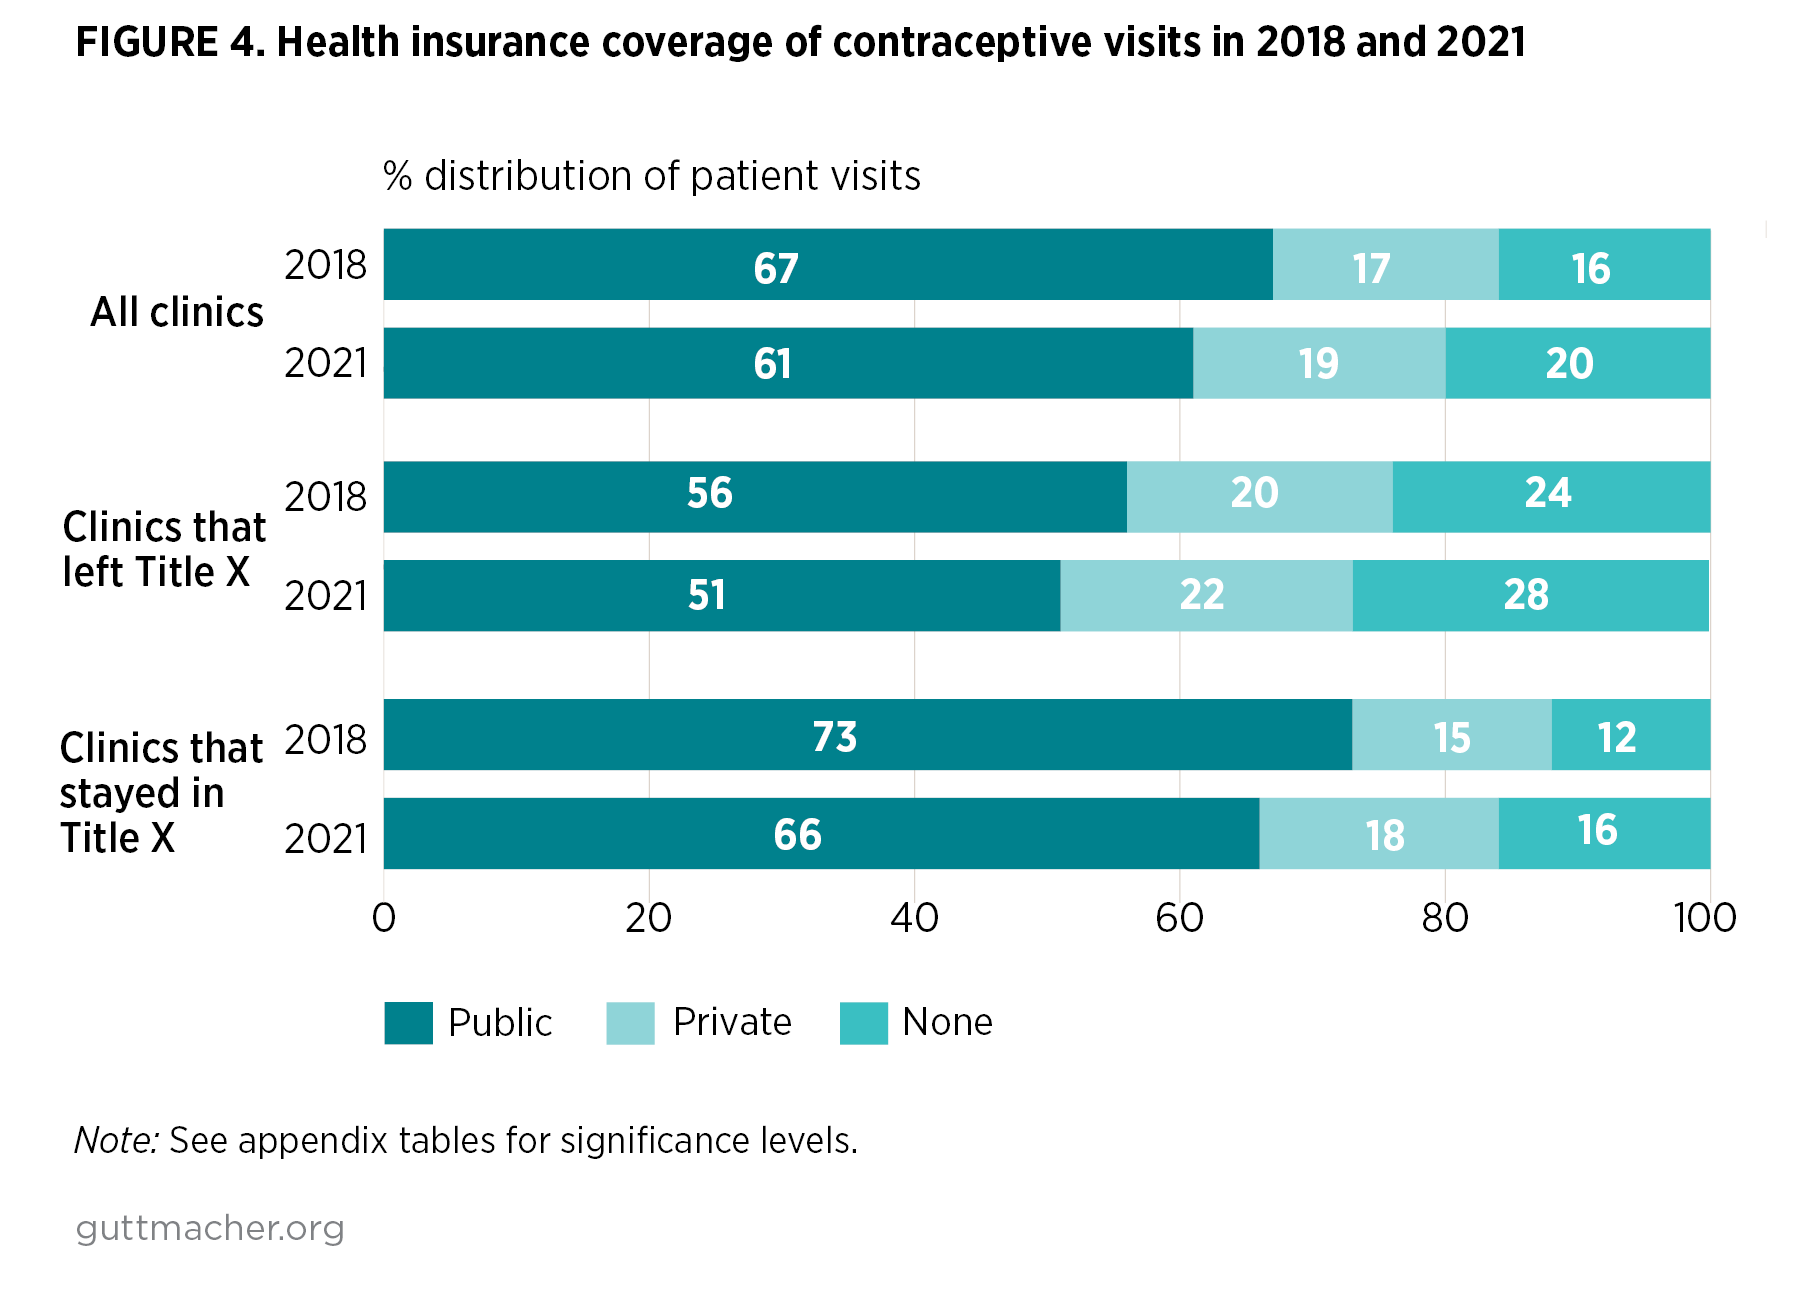 Bar chart showing Health insurance coverage of contraceptive visits in 2018 and 2021